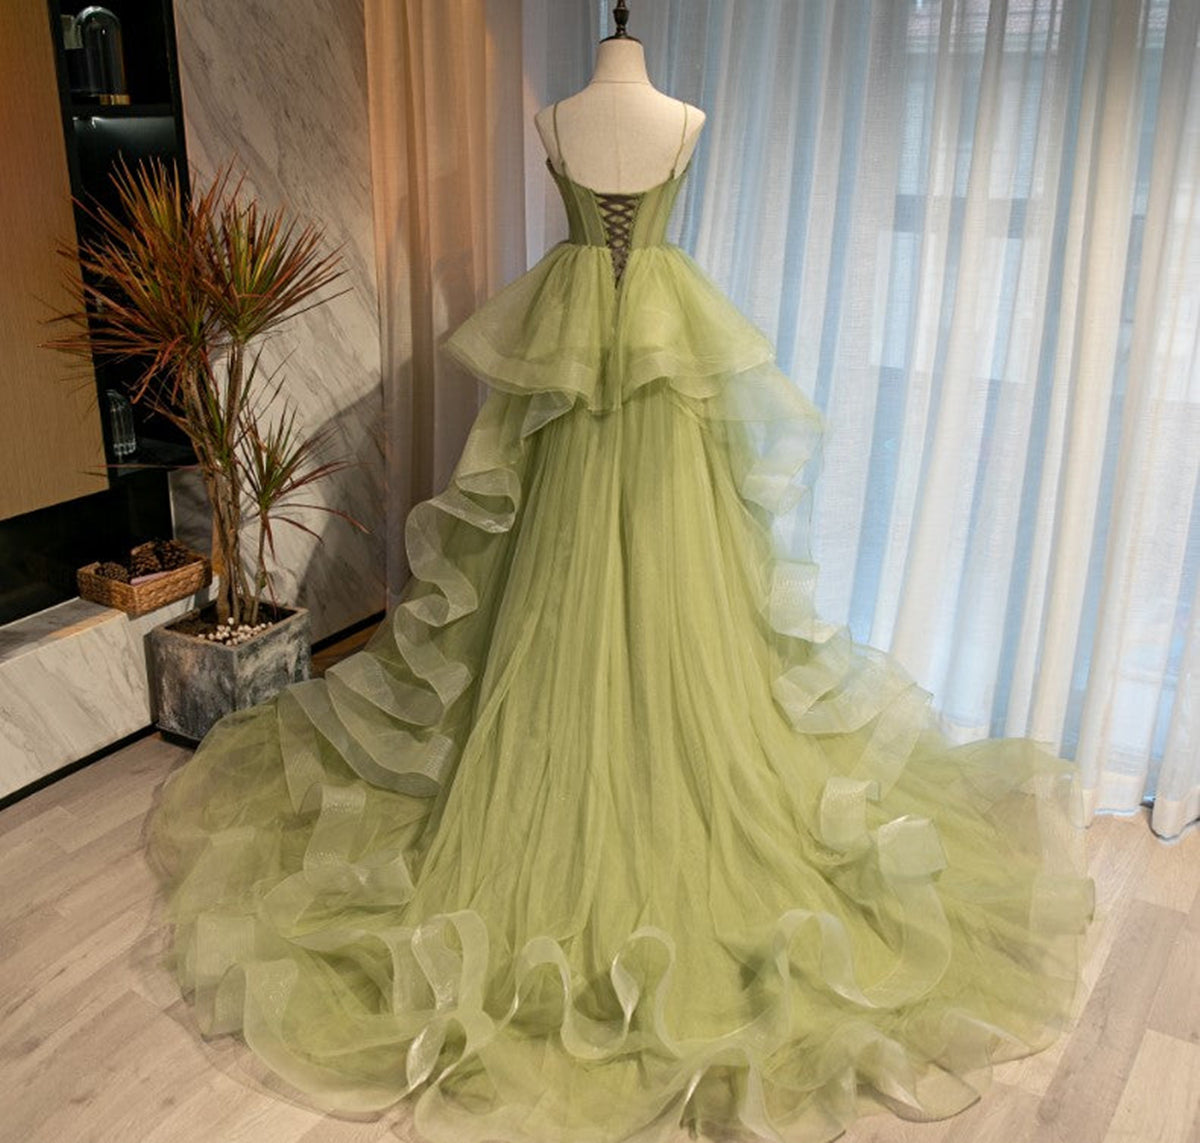  LINLSSANJC Plus Size Sage Green Tulle Prom Dresses for Teens  Girls Juniors Ball Gown US26W 26 Plus: Clothing, Shoes & Jewelry